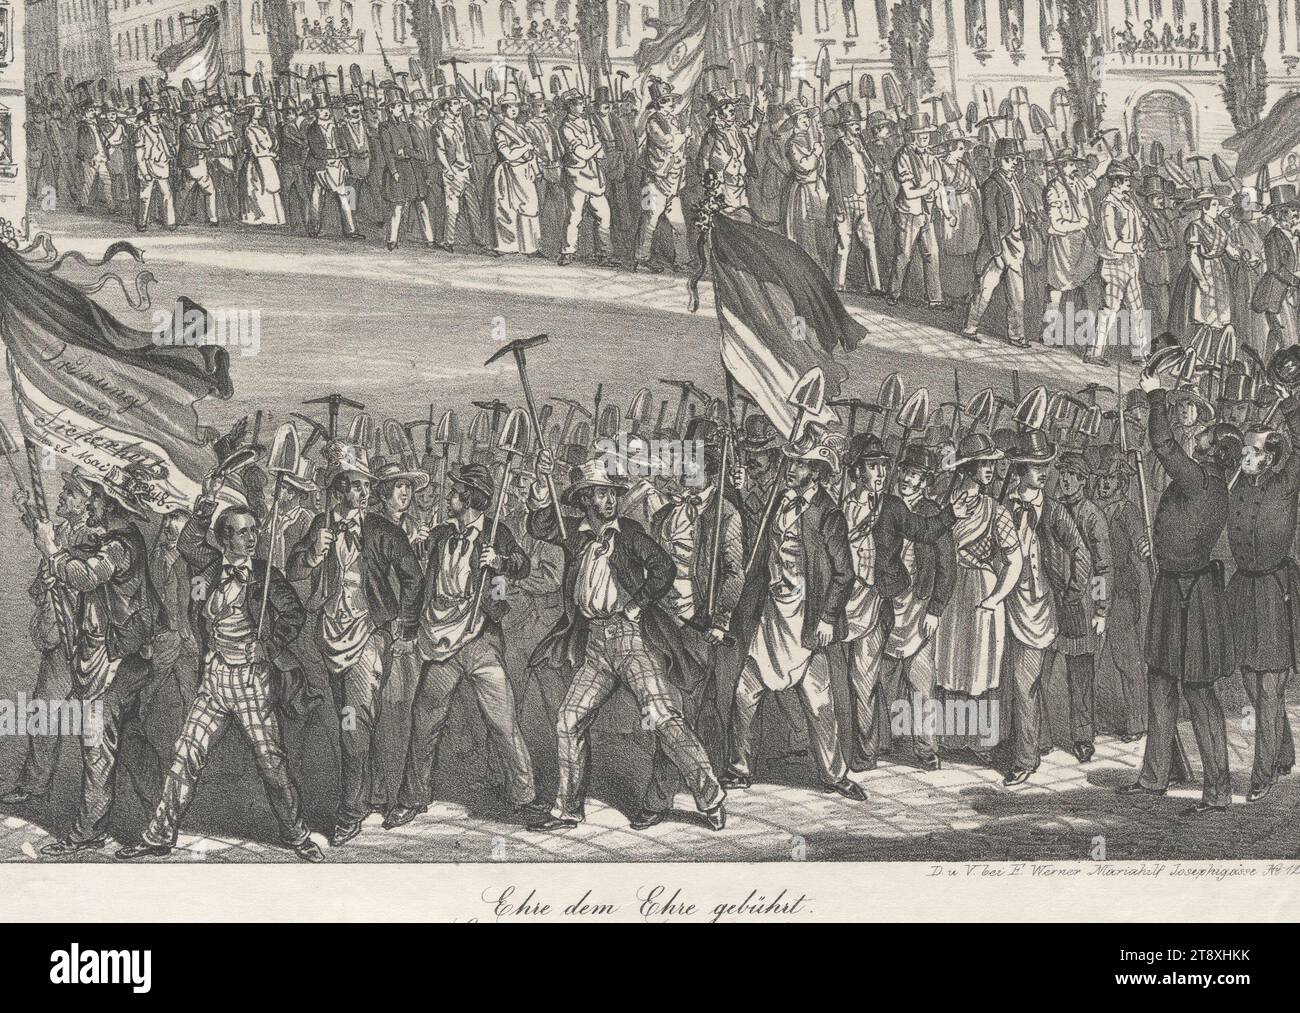 Honor to whom honor is due, Long live our brave workers.' (Procession of workers to build barricades on May 26, 1848), Franz Werner, publisher, 1848, paper, chalk lithograph, height 26.7 cm, width 38.1 cm, fine art, workers, revolutions of 1848, 1849, obstacles in streets; barricades, flag, colors (as a symbol of the state, etc.), The Vienna Collection Stock Photo